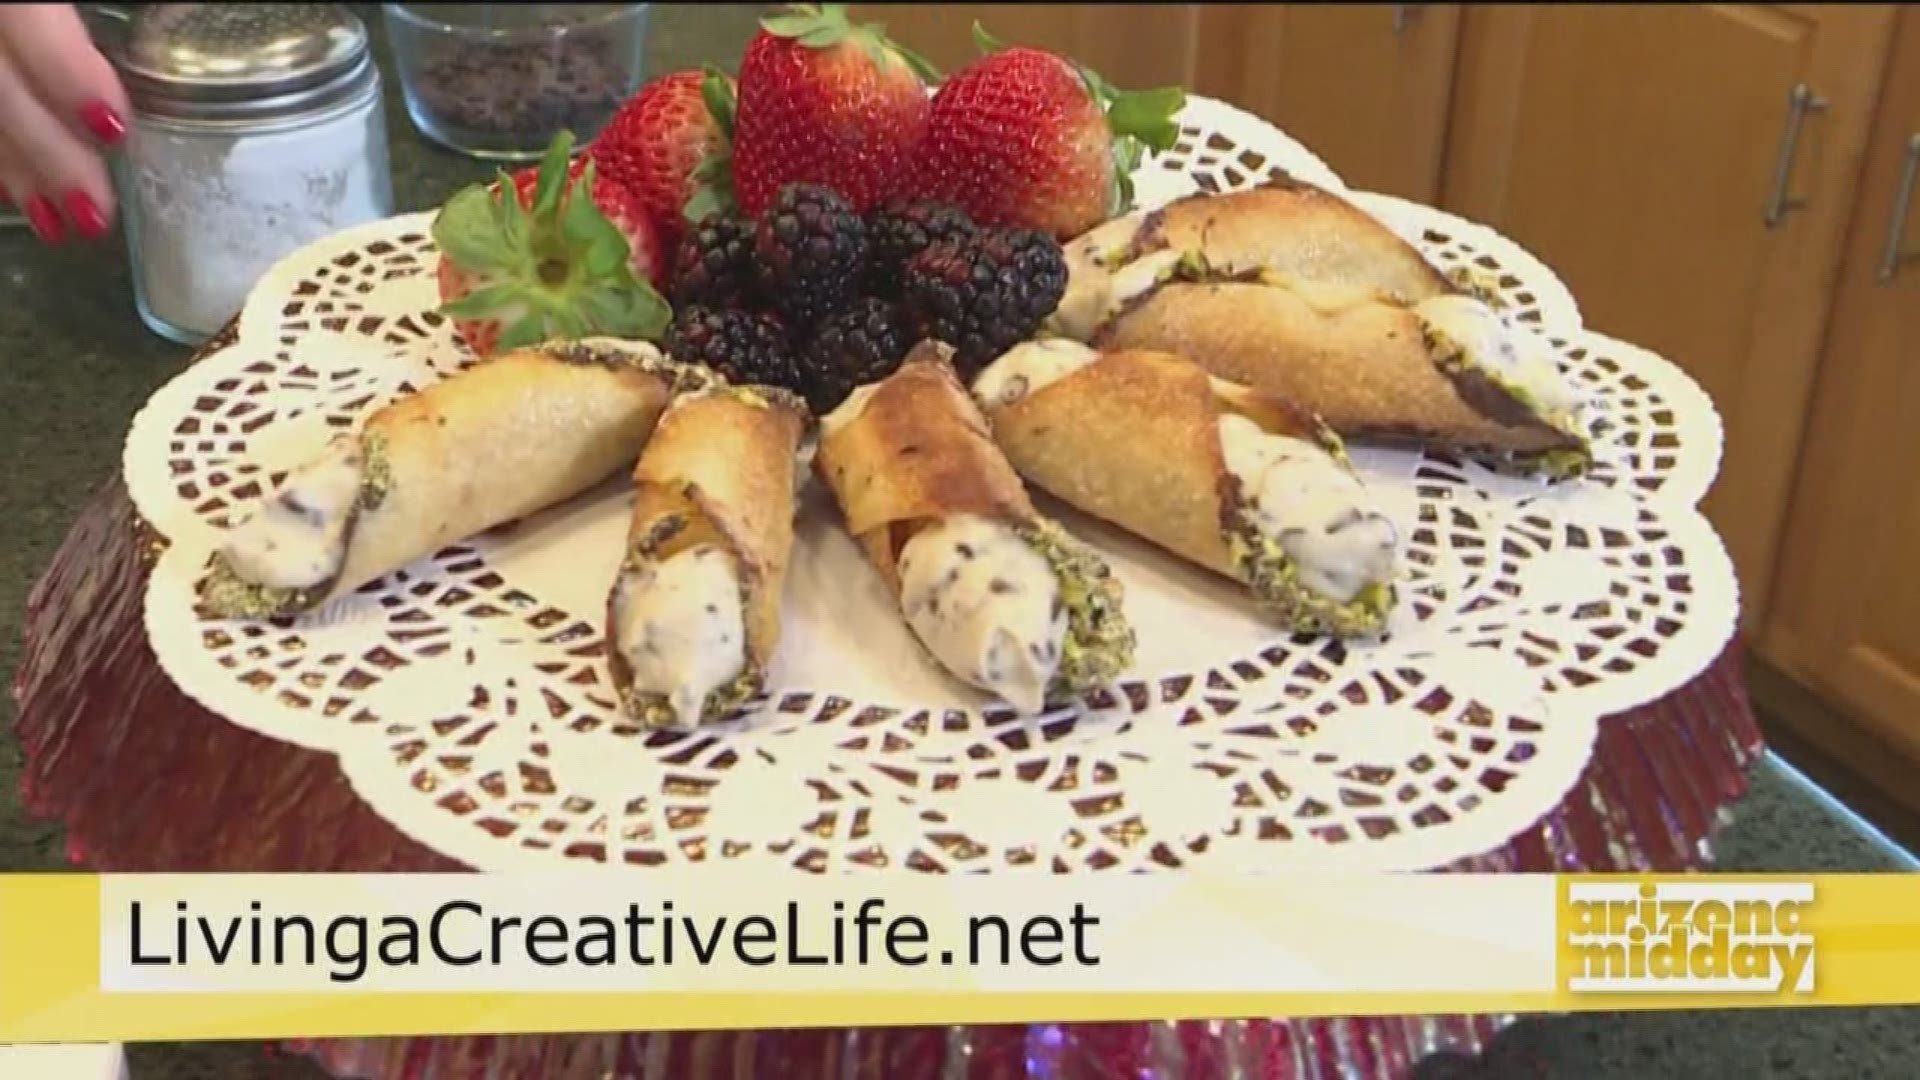 Suzanne Clark with Livingacreativelife.net shows us an easy way to make delicious mini cannolis.